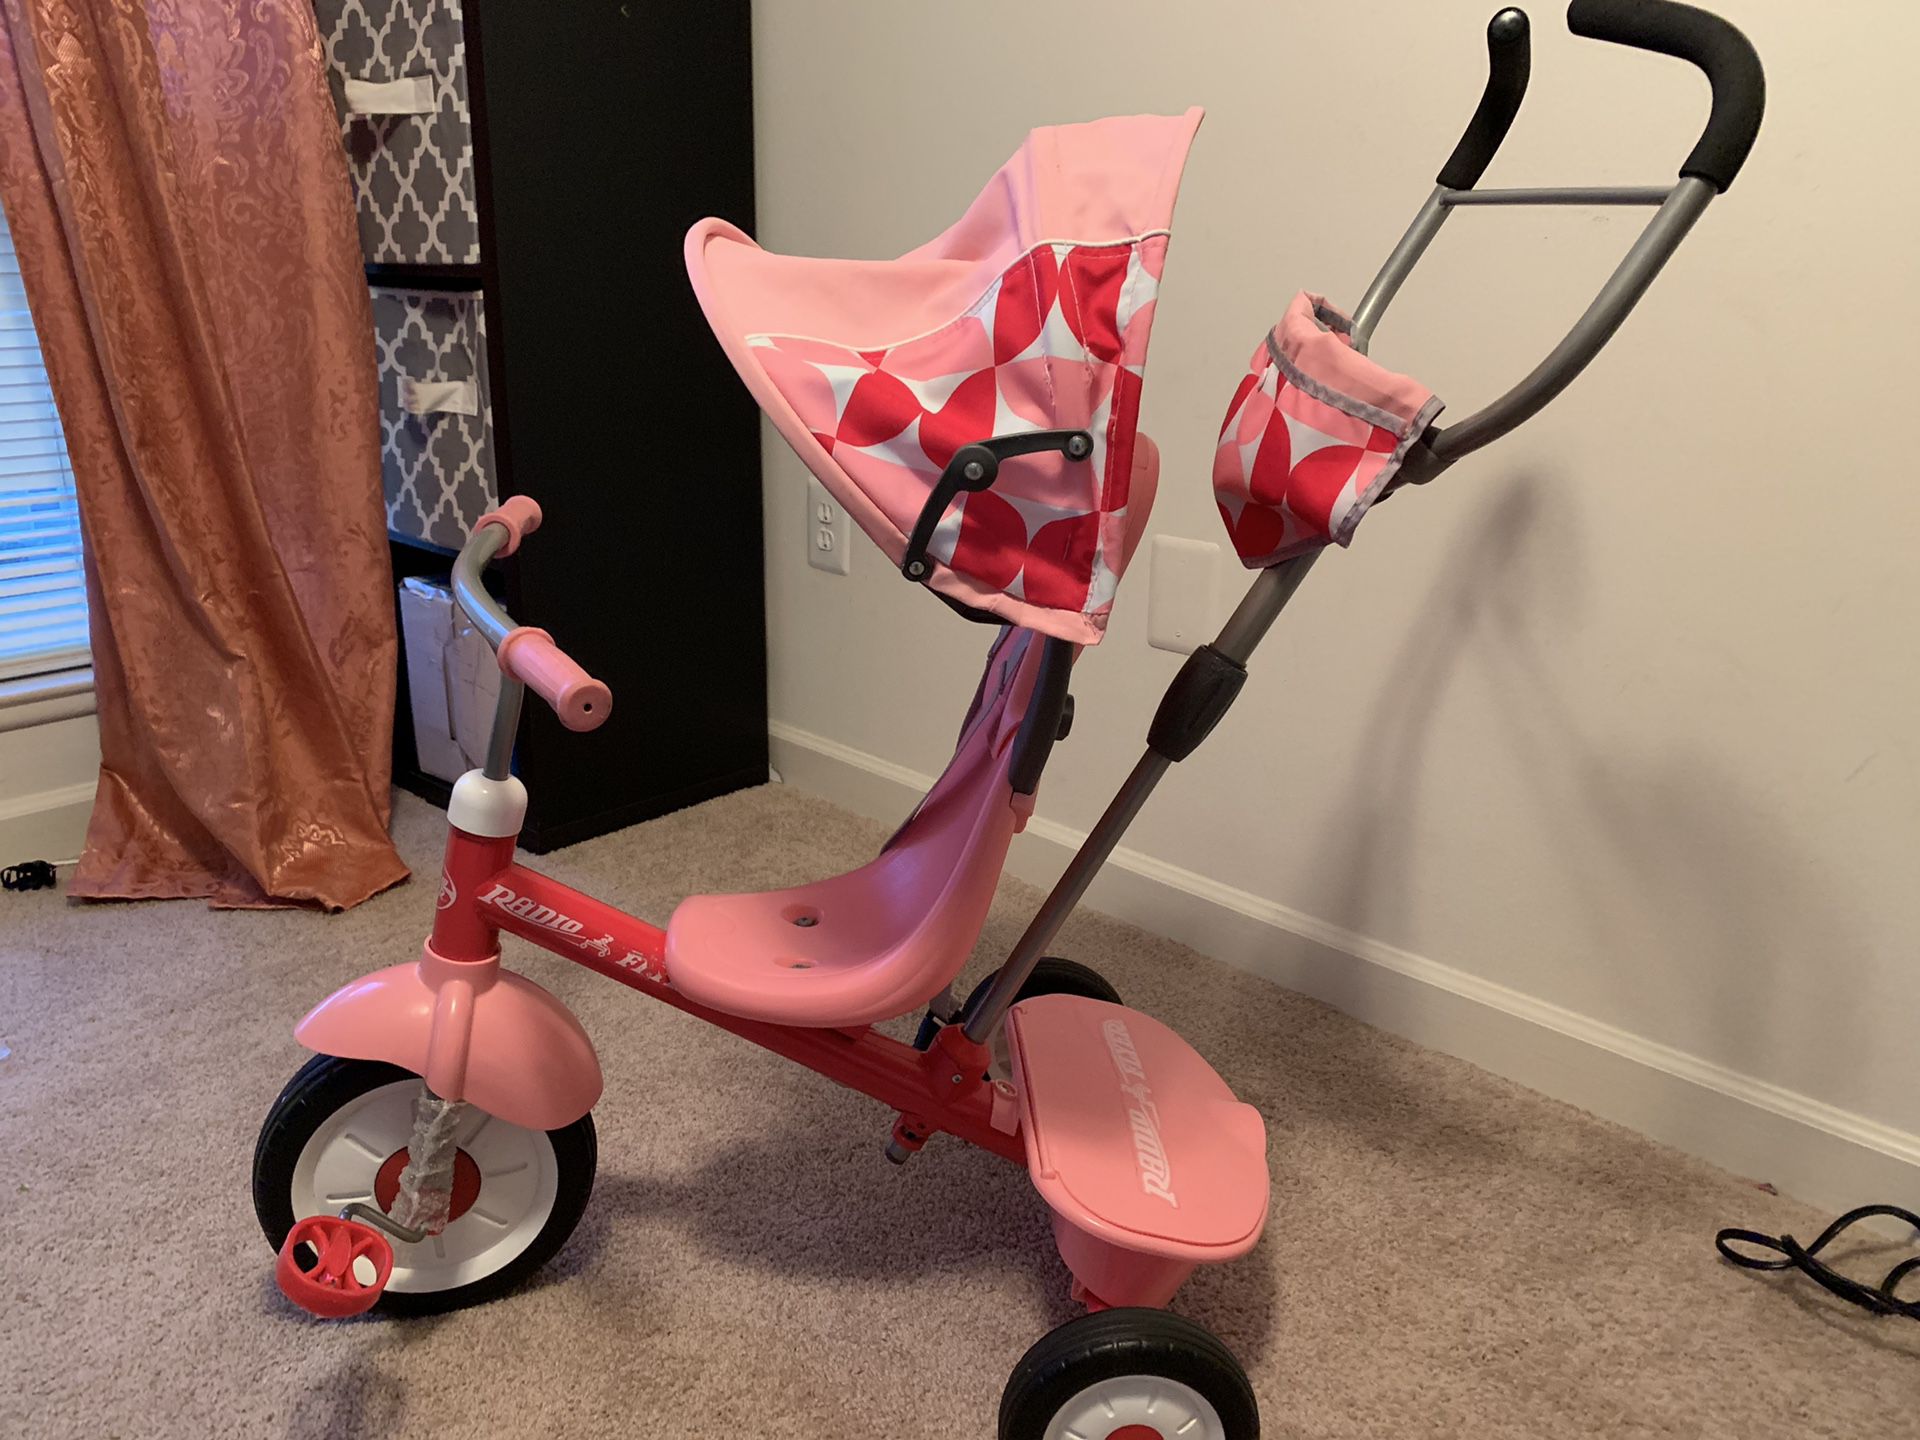 Radio flyer bicycle for kids - cycle - very good condition